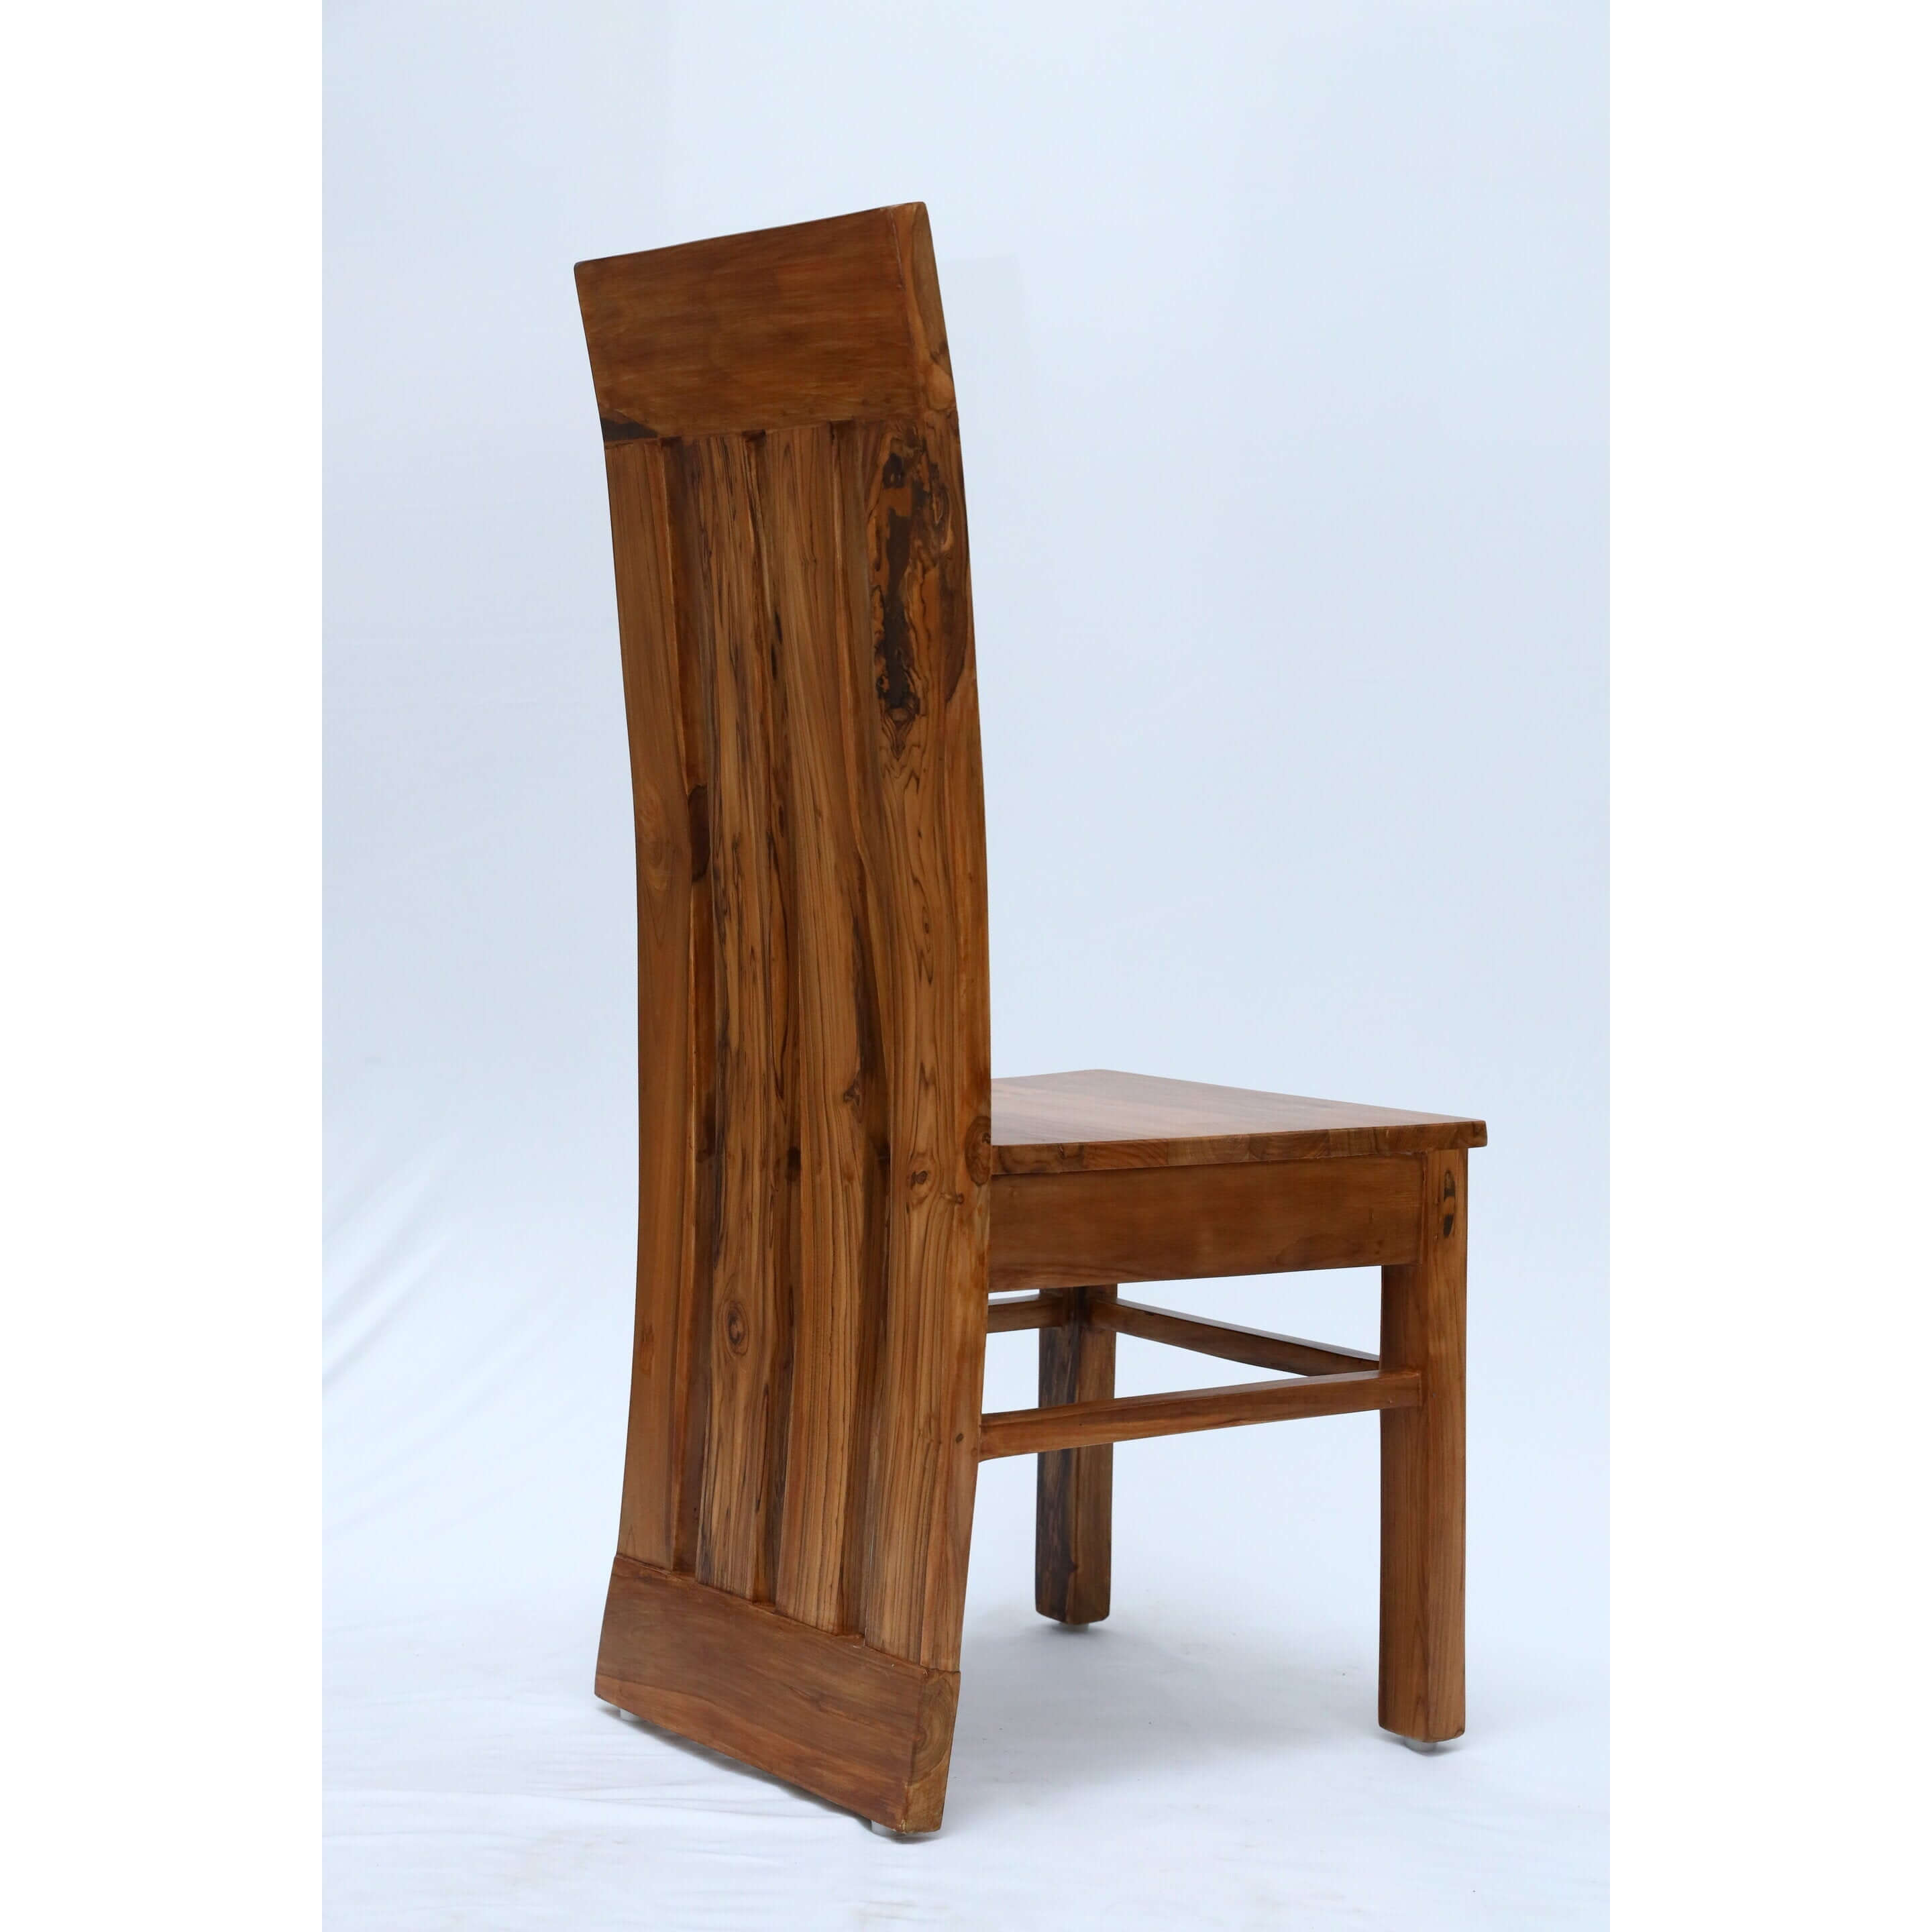 Teak wood dining chair with high backrest tch-2101